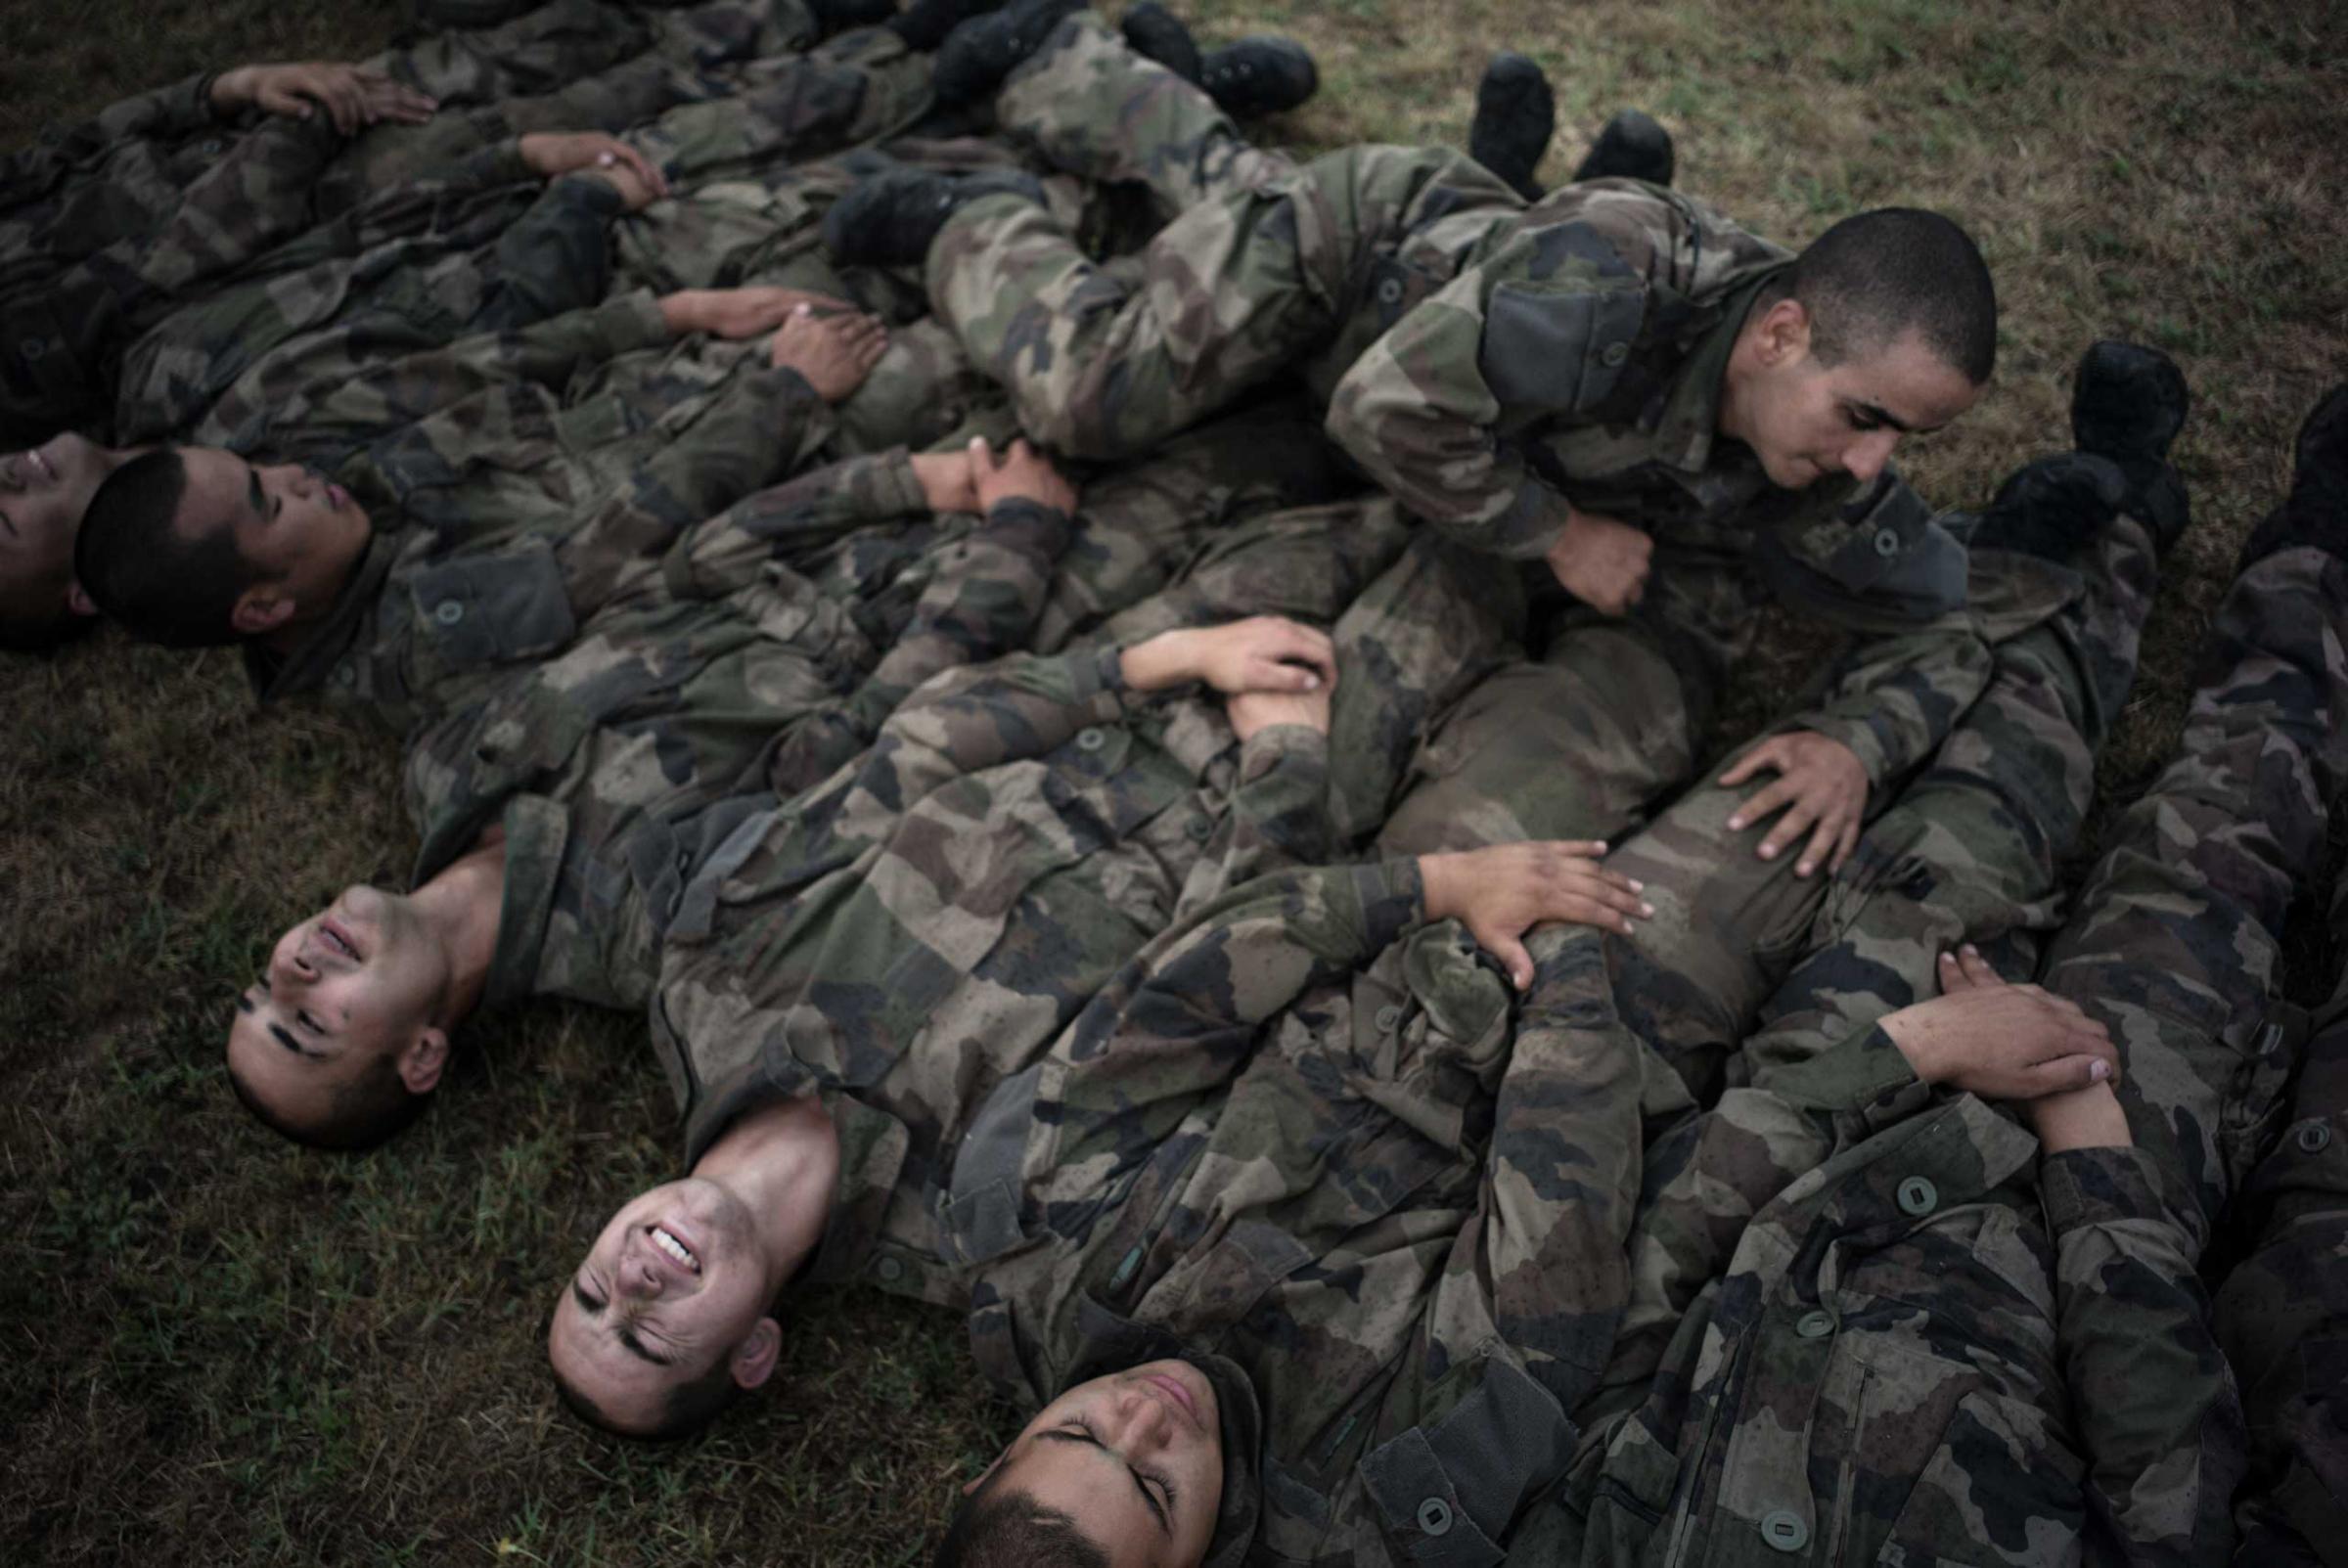 Training exercises designed to reinforce the group's cohesion. Aug. 4, 2015.